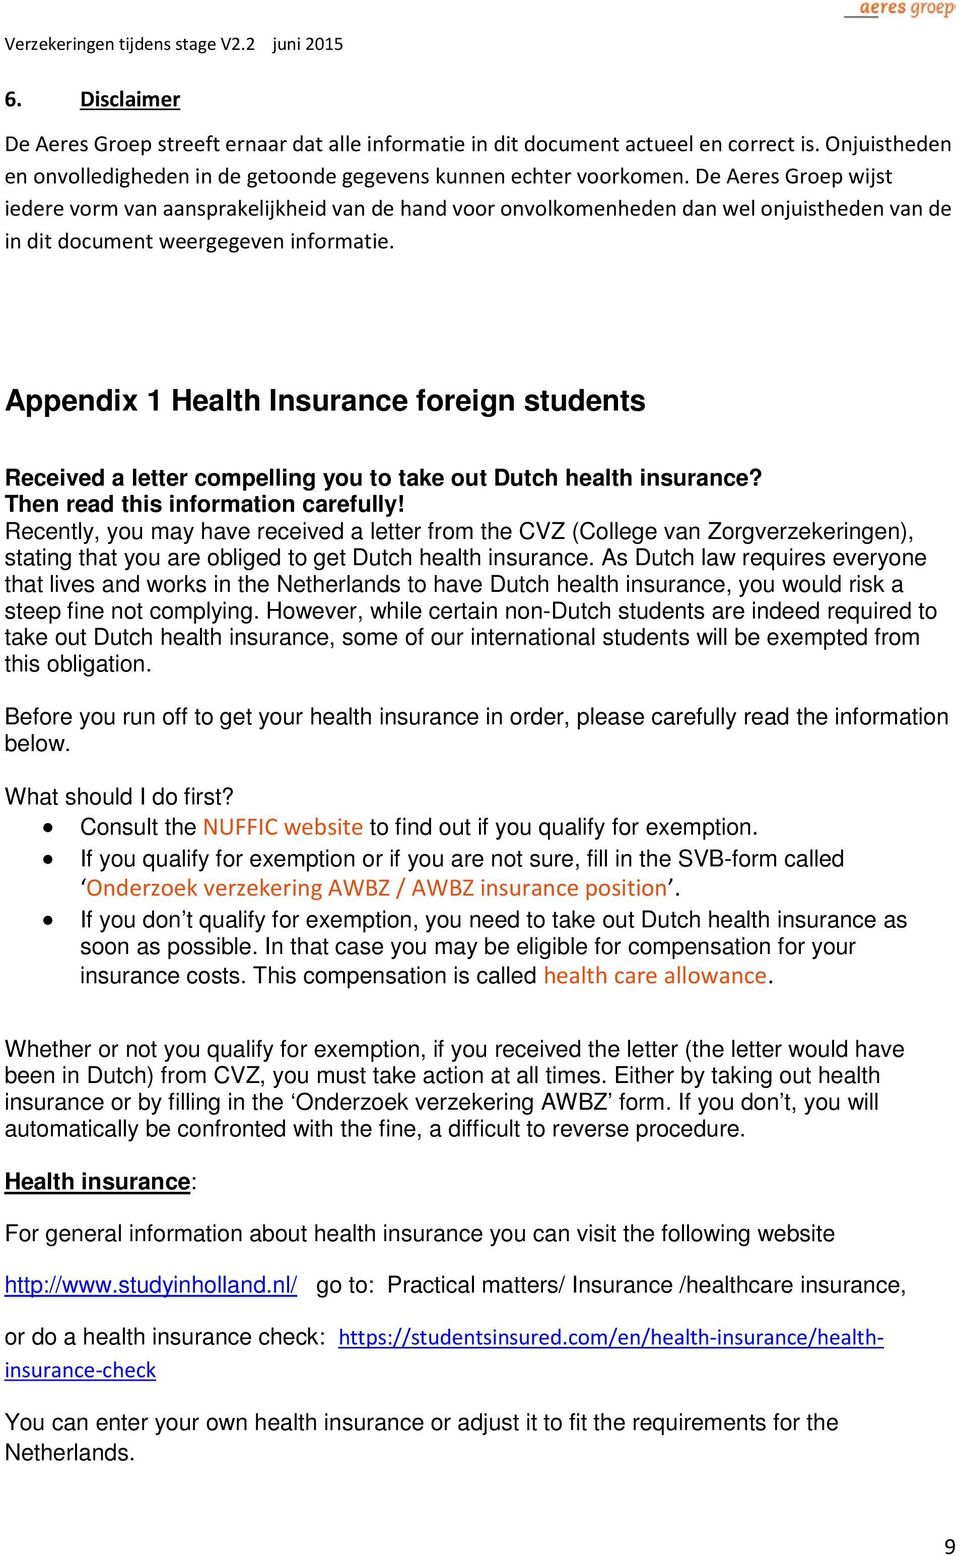 Appendix 1 Health Insurance foreign students Received a letter compelling you to take out Dutch health insurance? Then read this information carefully!